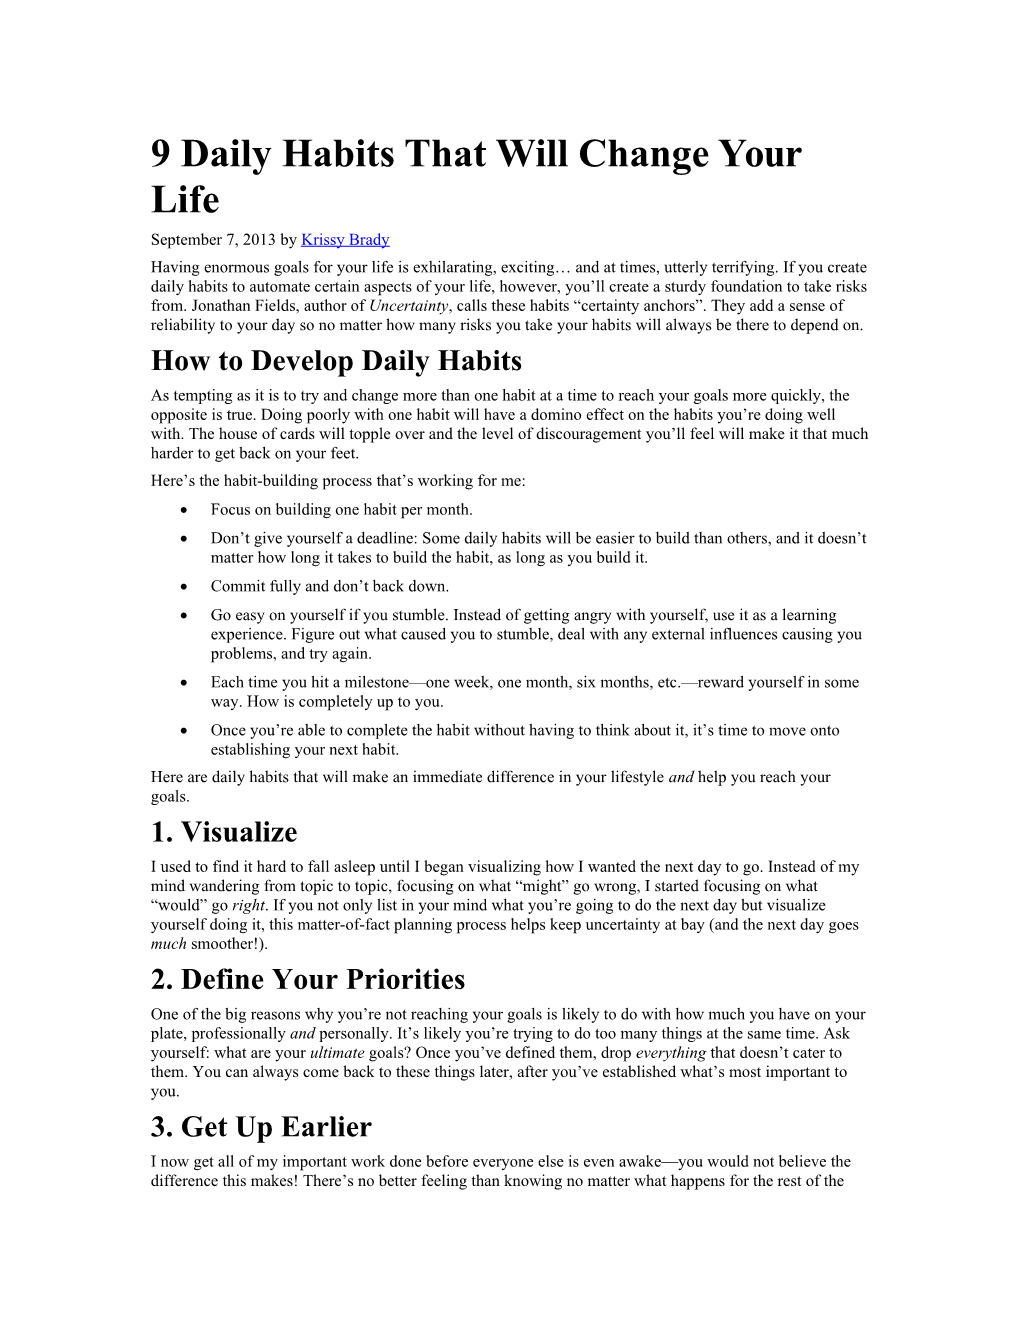 9 Daily Habits That Will Change Your Life